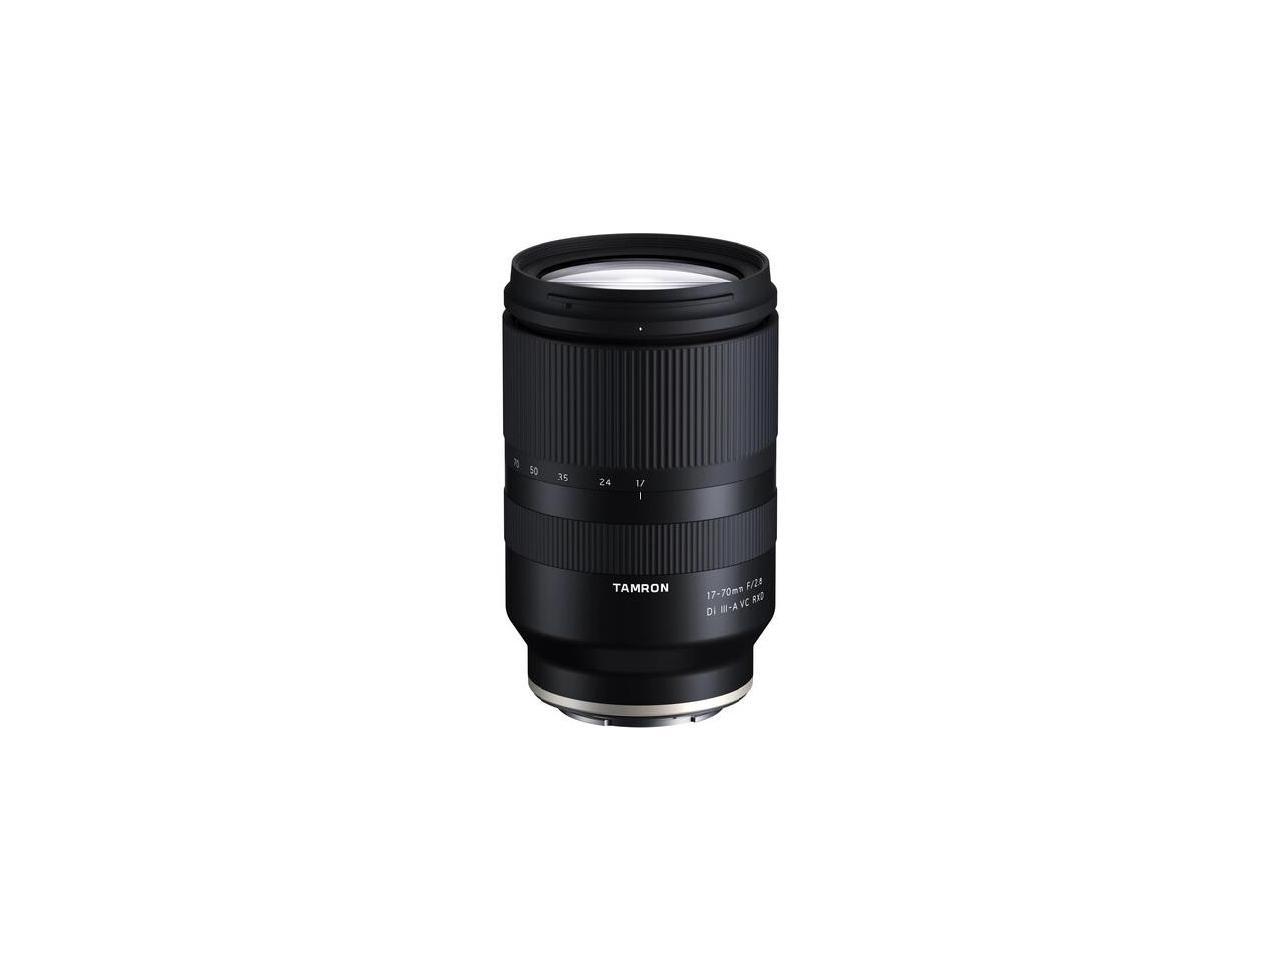 Tamron 17-70mm f/2.8 Di III-A VC RXD Lens for Sony E APS-C Mirrorless Cameras (International Model)